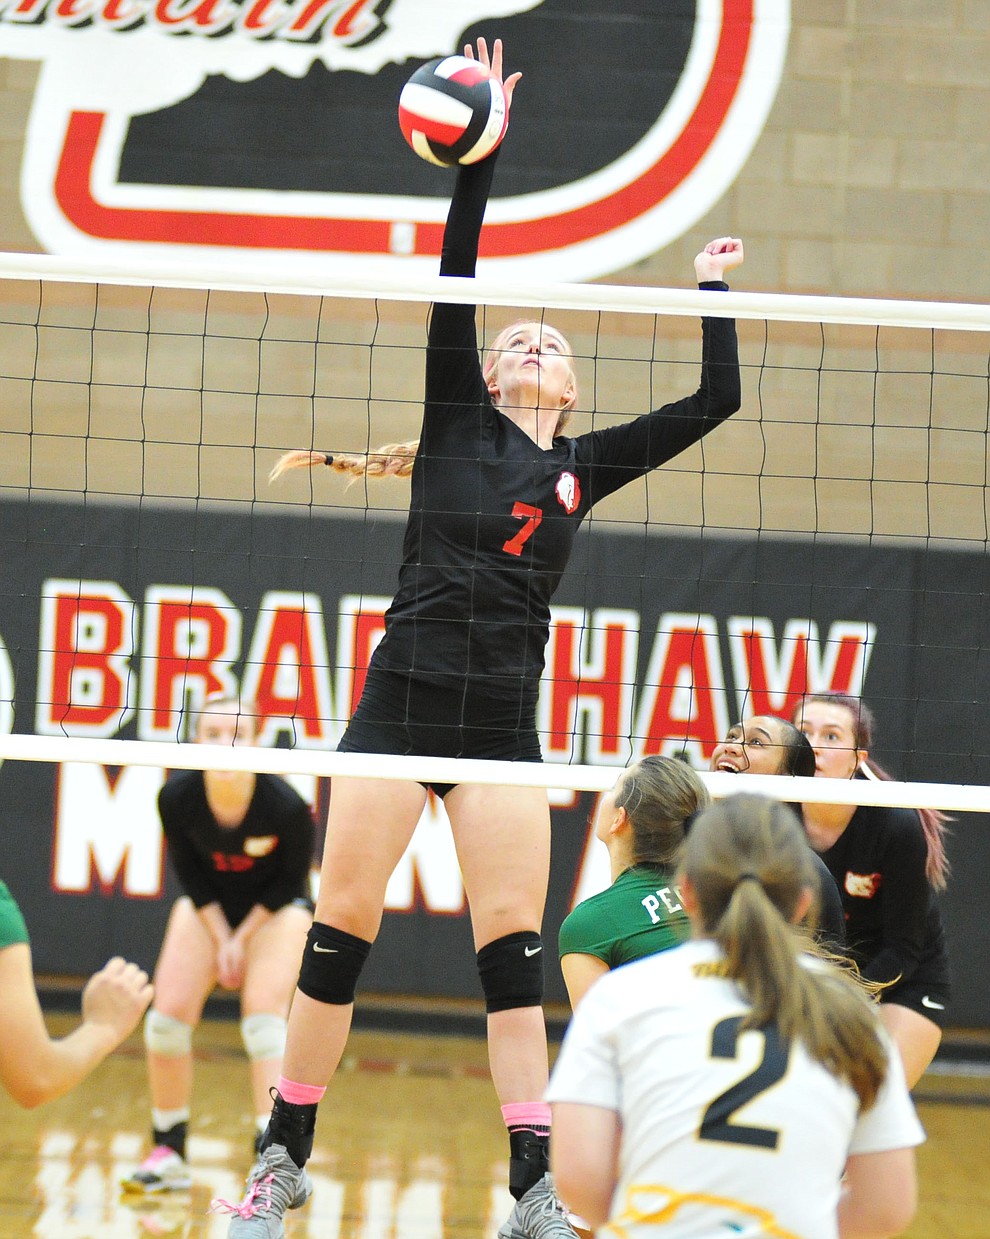 Bradshaw Mountain's Rylee Bundrick slams down a kill as the Bears play in the play-in game for the AIA 4A State Volleyball Tournament against Peoria Thursday, Oct. 25, 2018 in Prescott Valley. (Les Stukenberg/Courier).